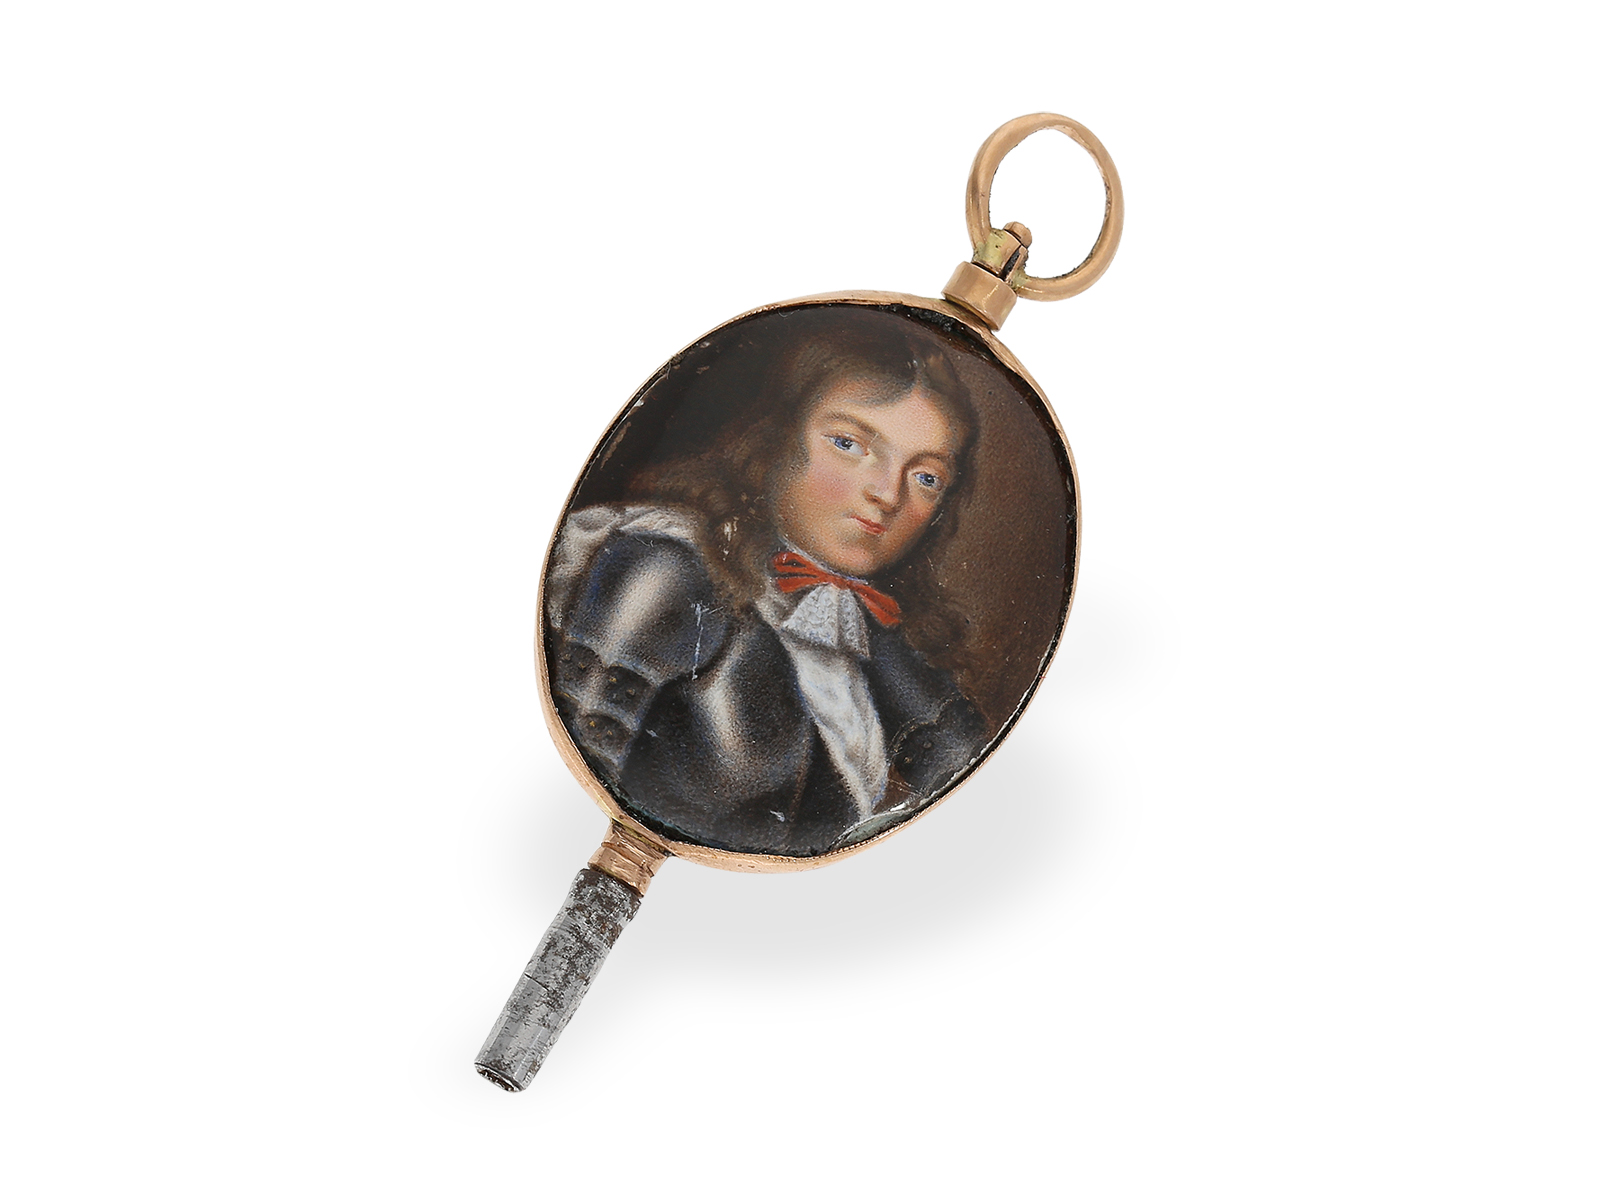 Watch key: extremely rare gold/enamel watch key with painting, possibly around 1750